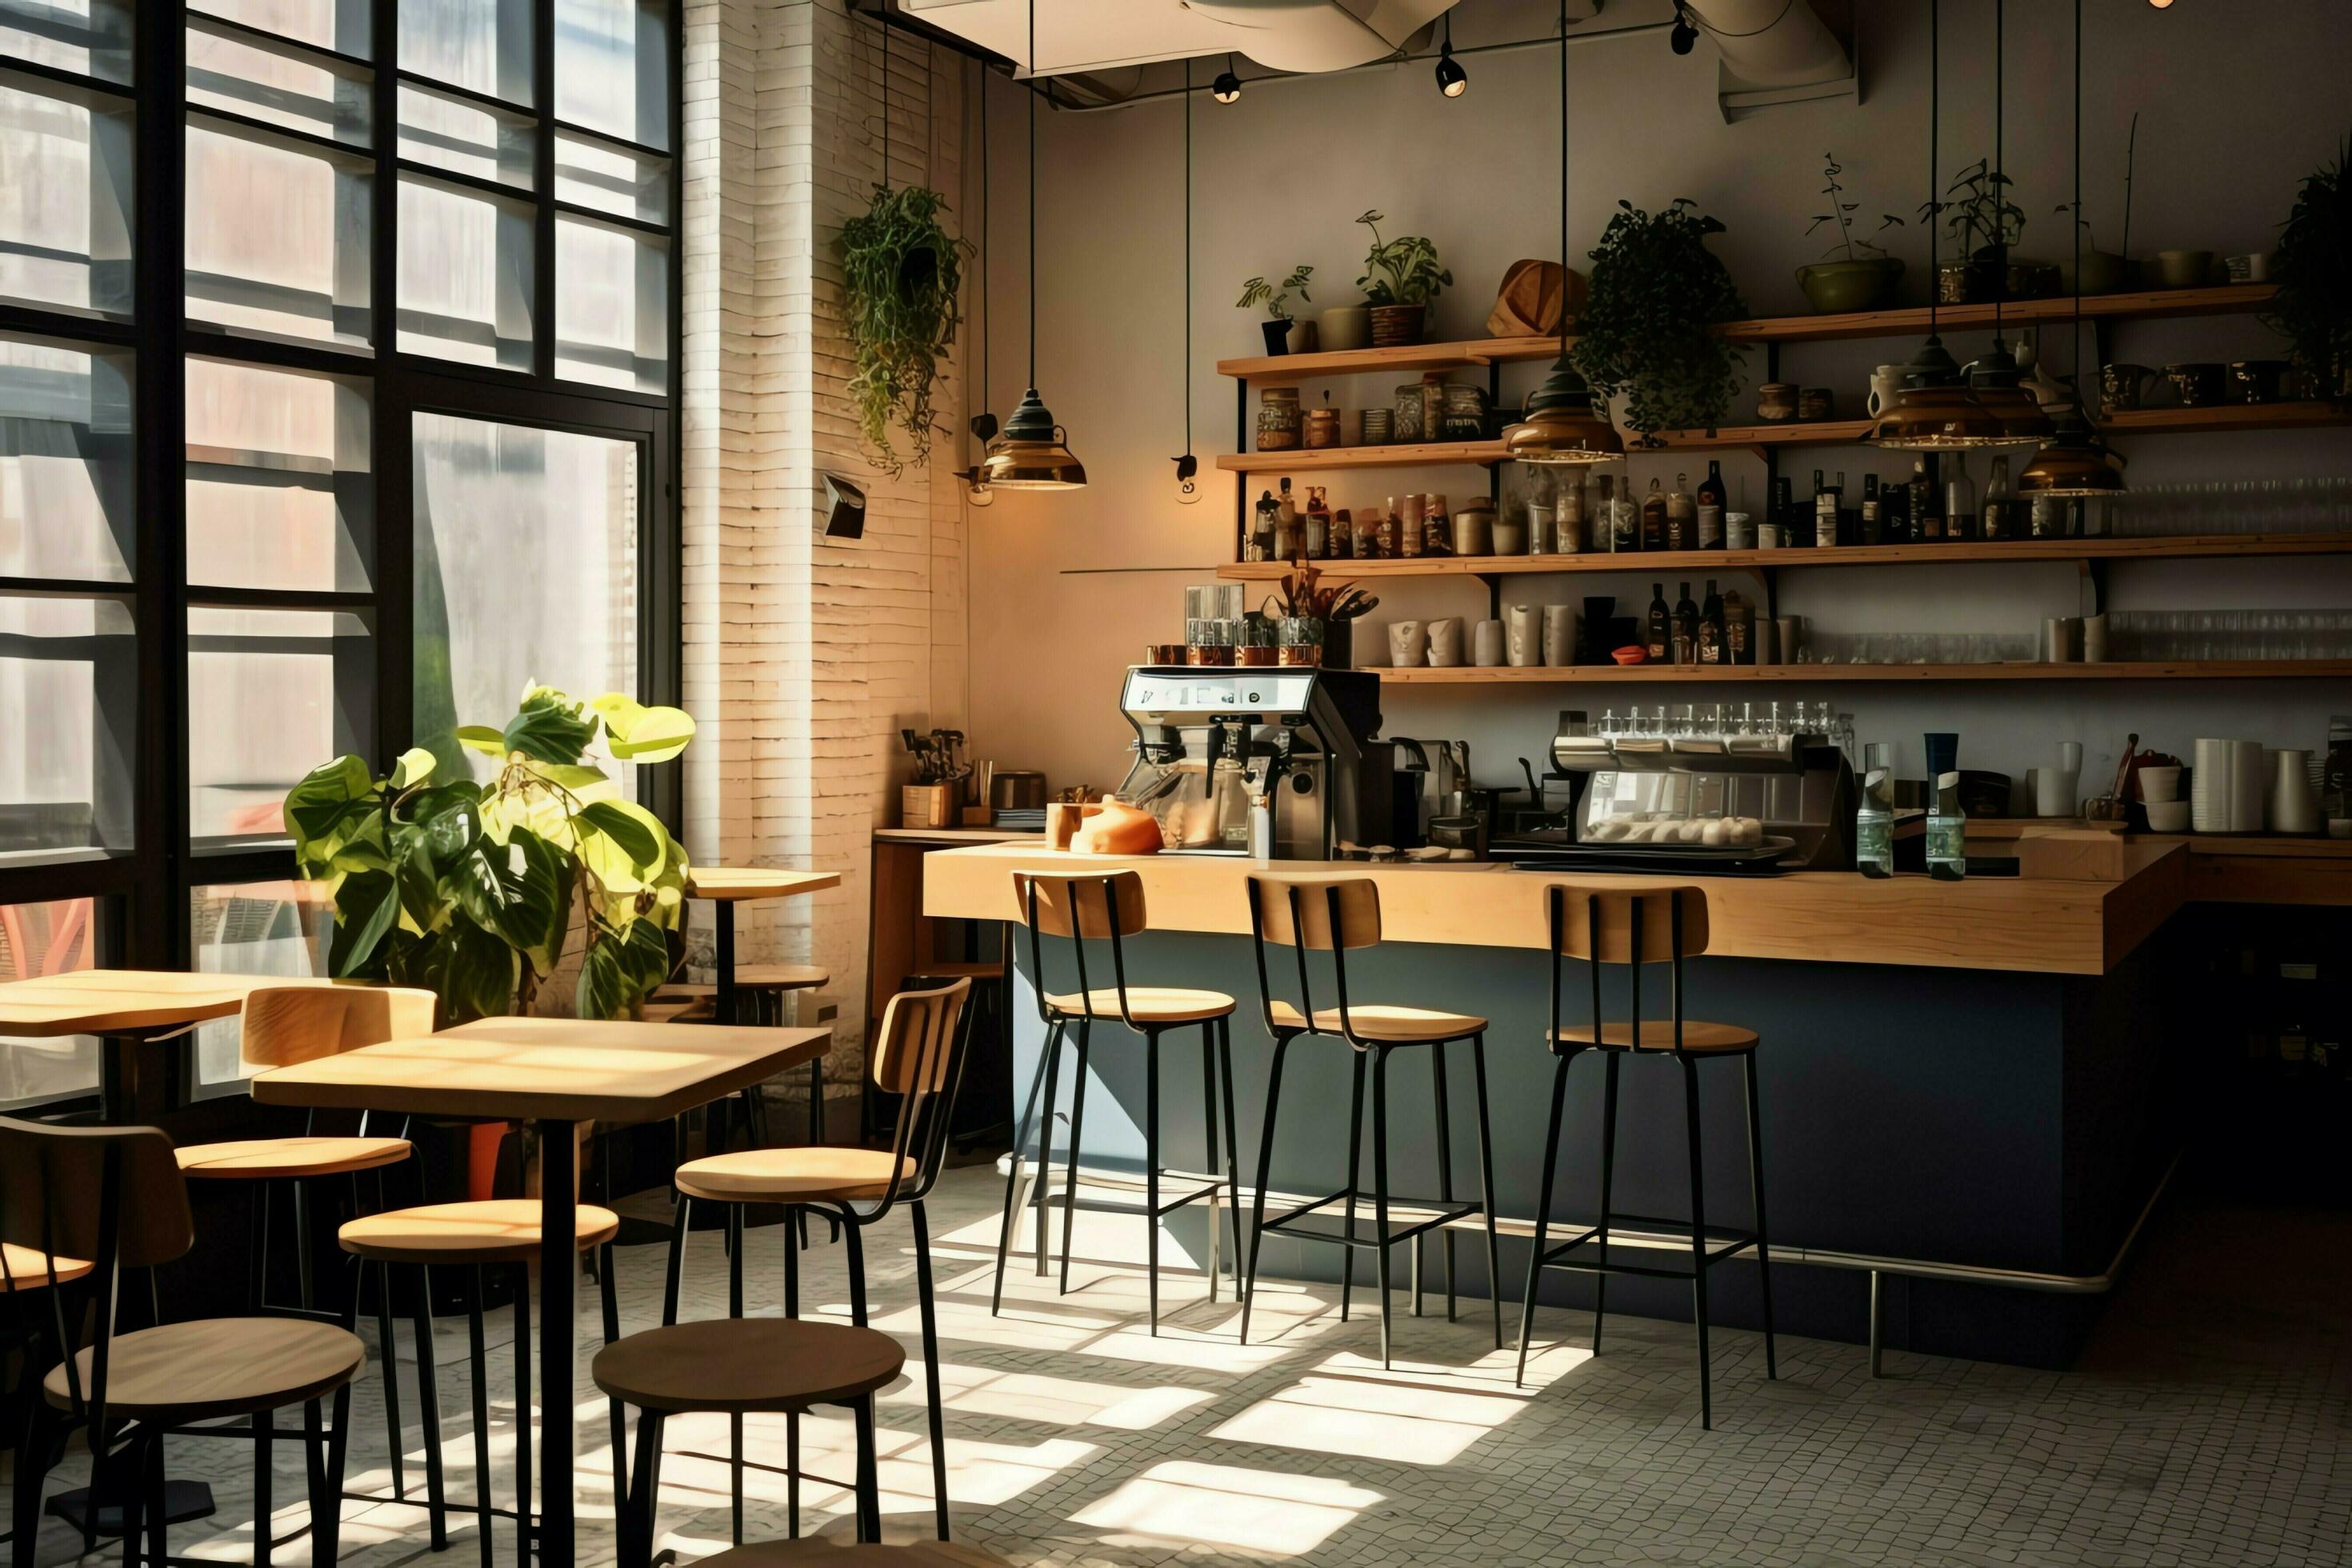 Inside clean kitchen of a modern restaurant or mini cafe with